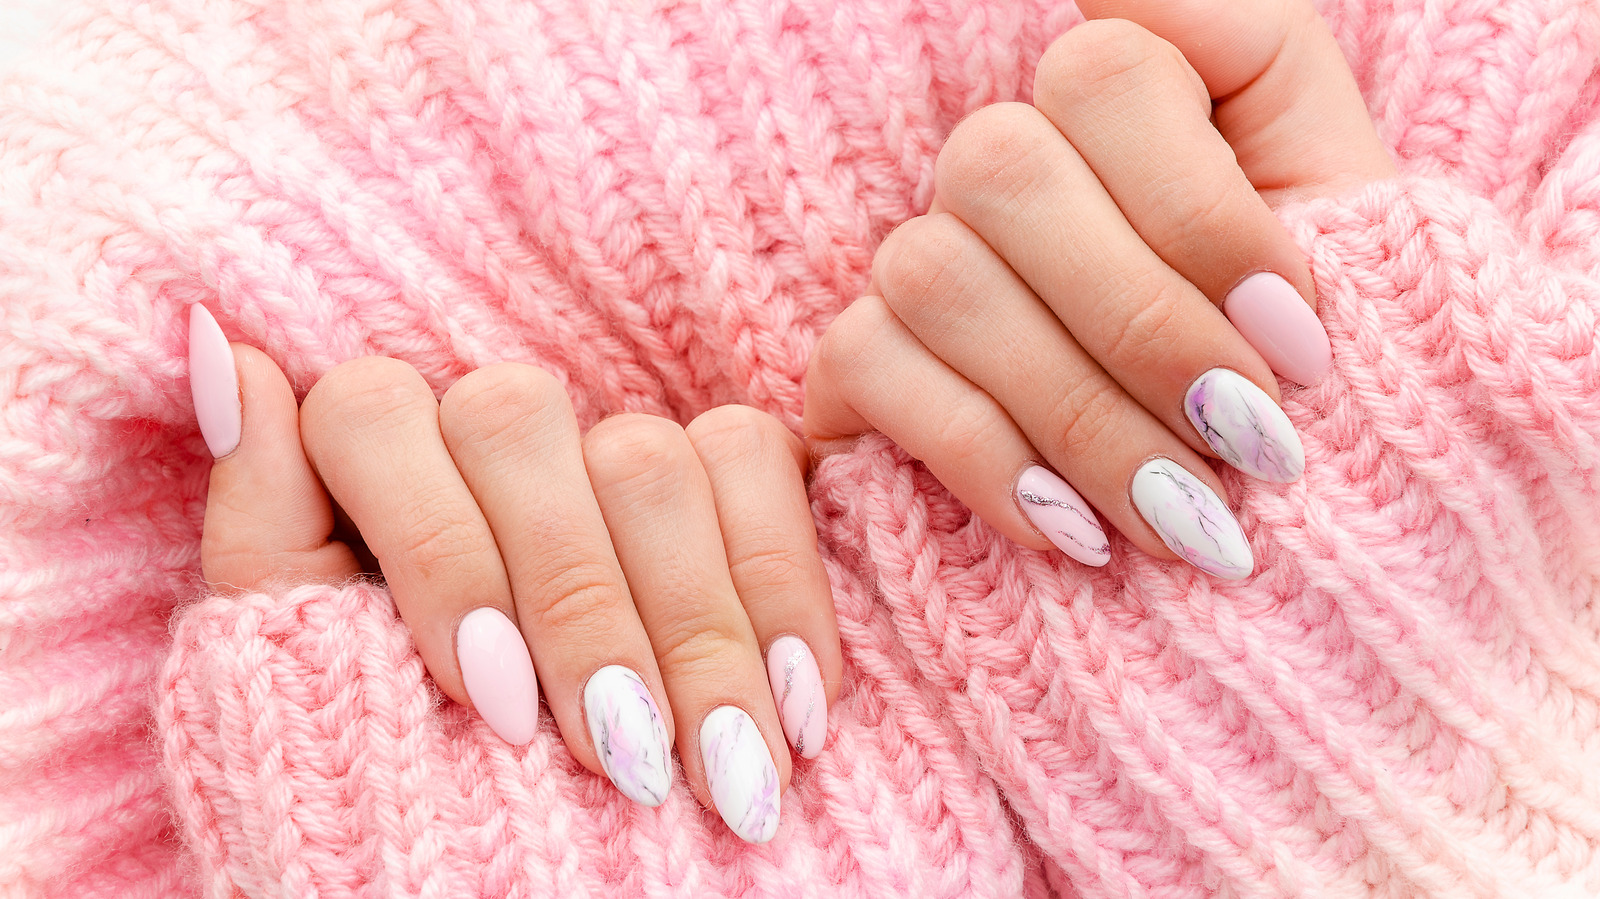 9. "Nail Colors That Make Your Hands Look Younger" - wide 8